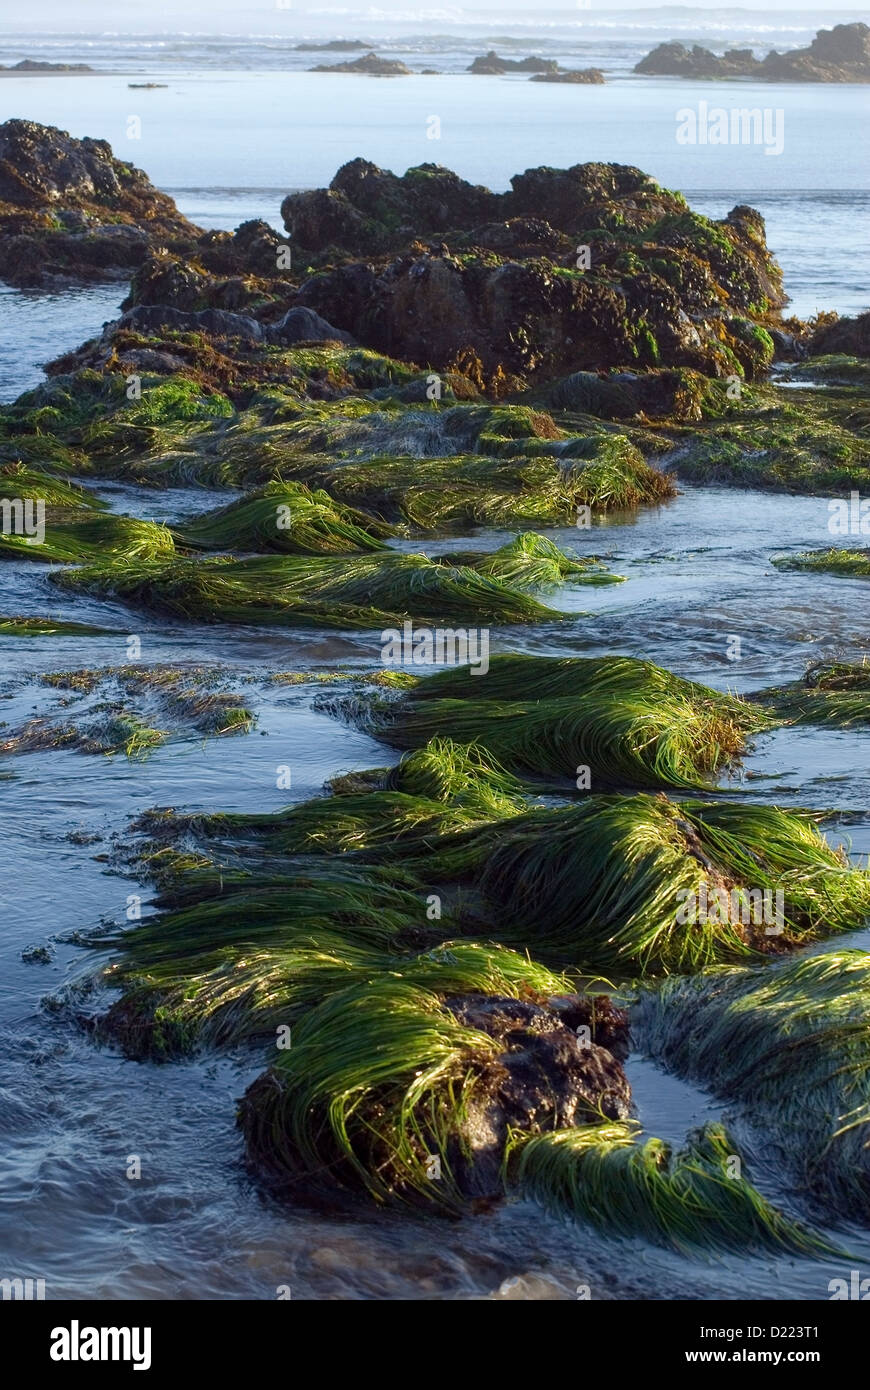 Seagrass is illuminated by beautiful afternoon light at low tide in Baja, Mexico. Stock Photo